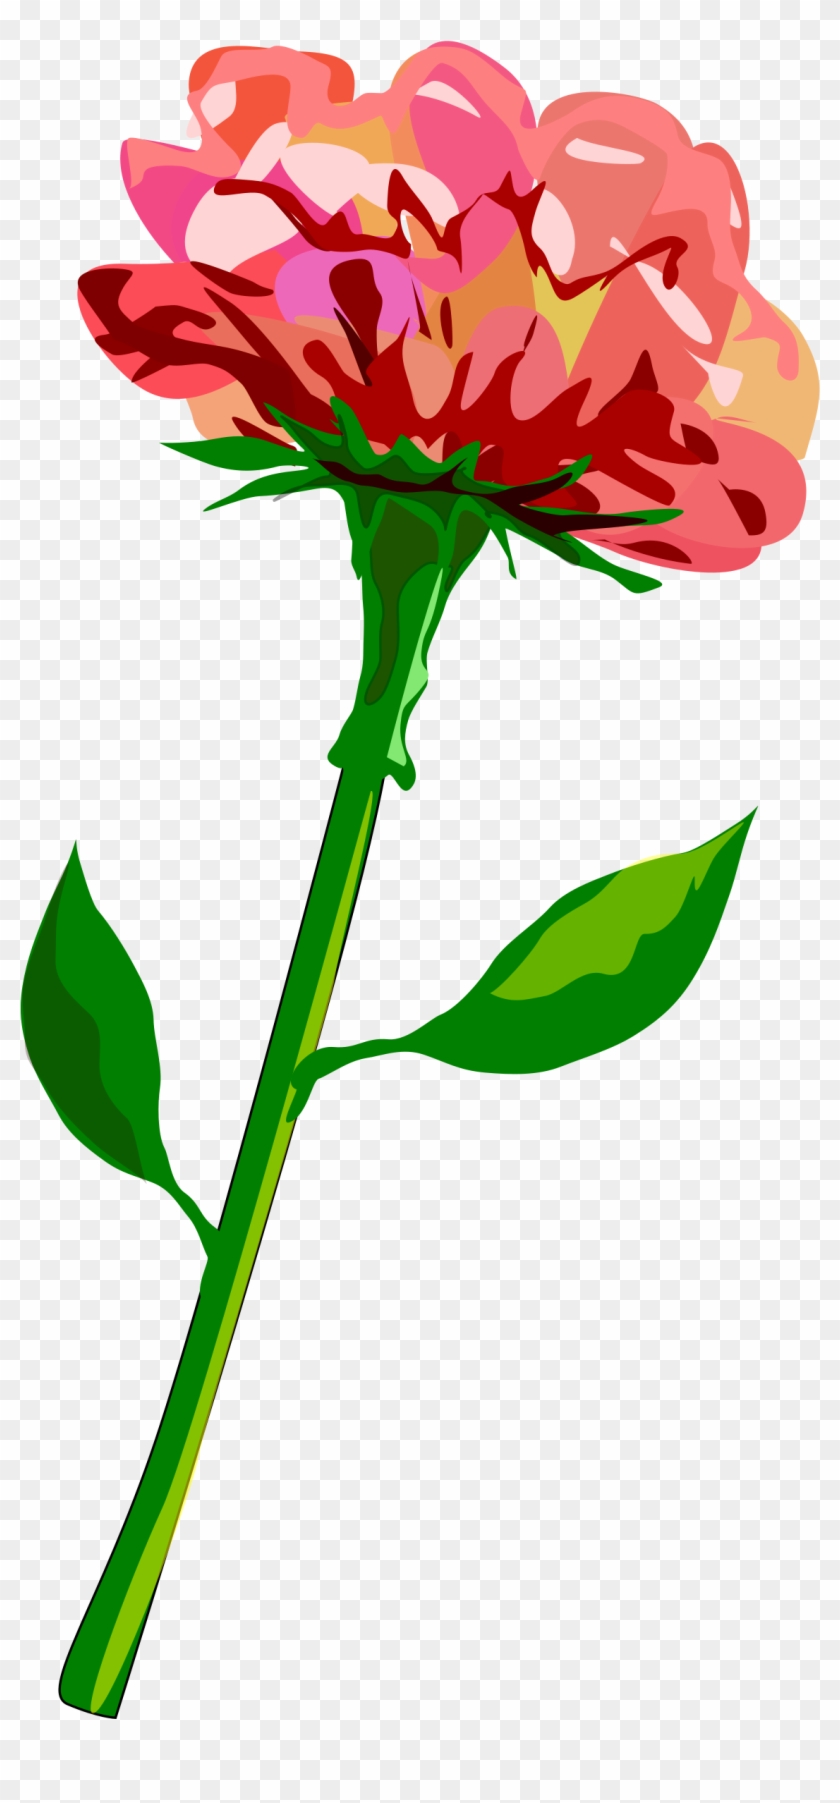 This Free Icons Png Design Of Red-flower Clipart #654462